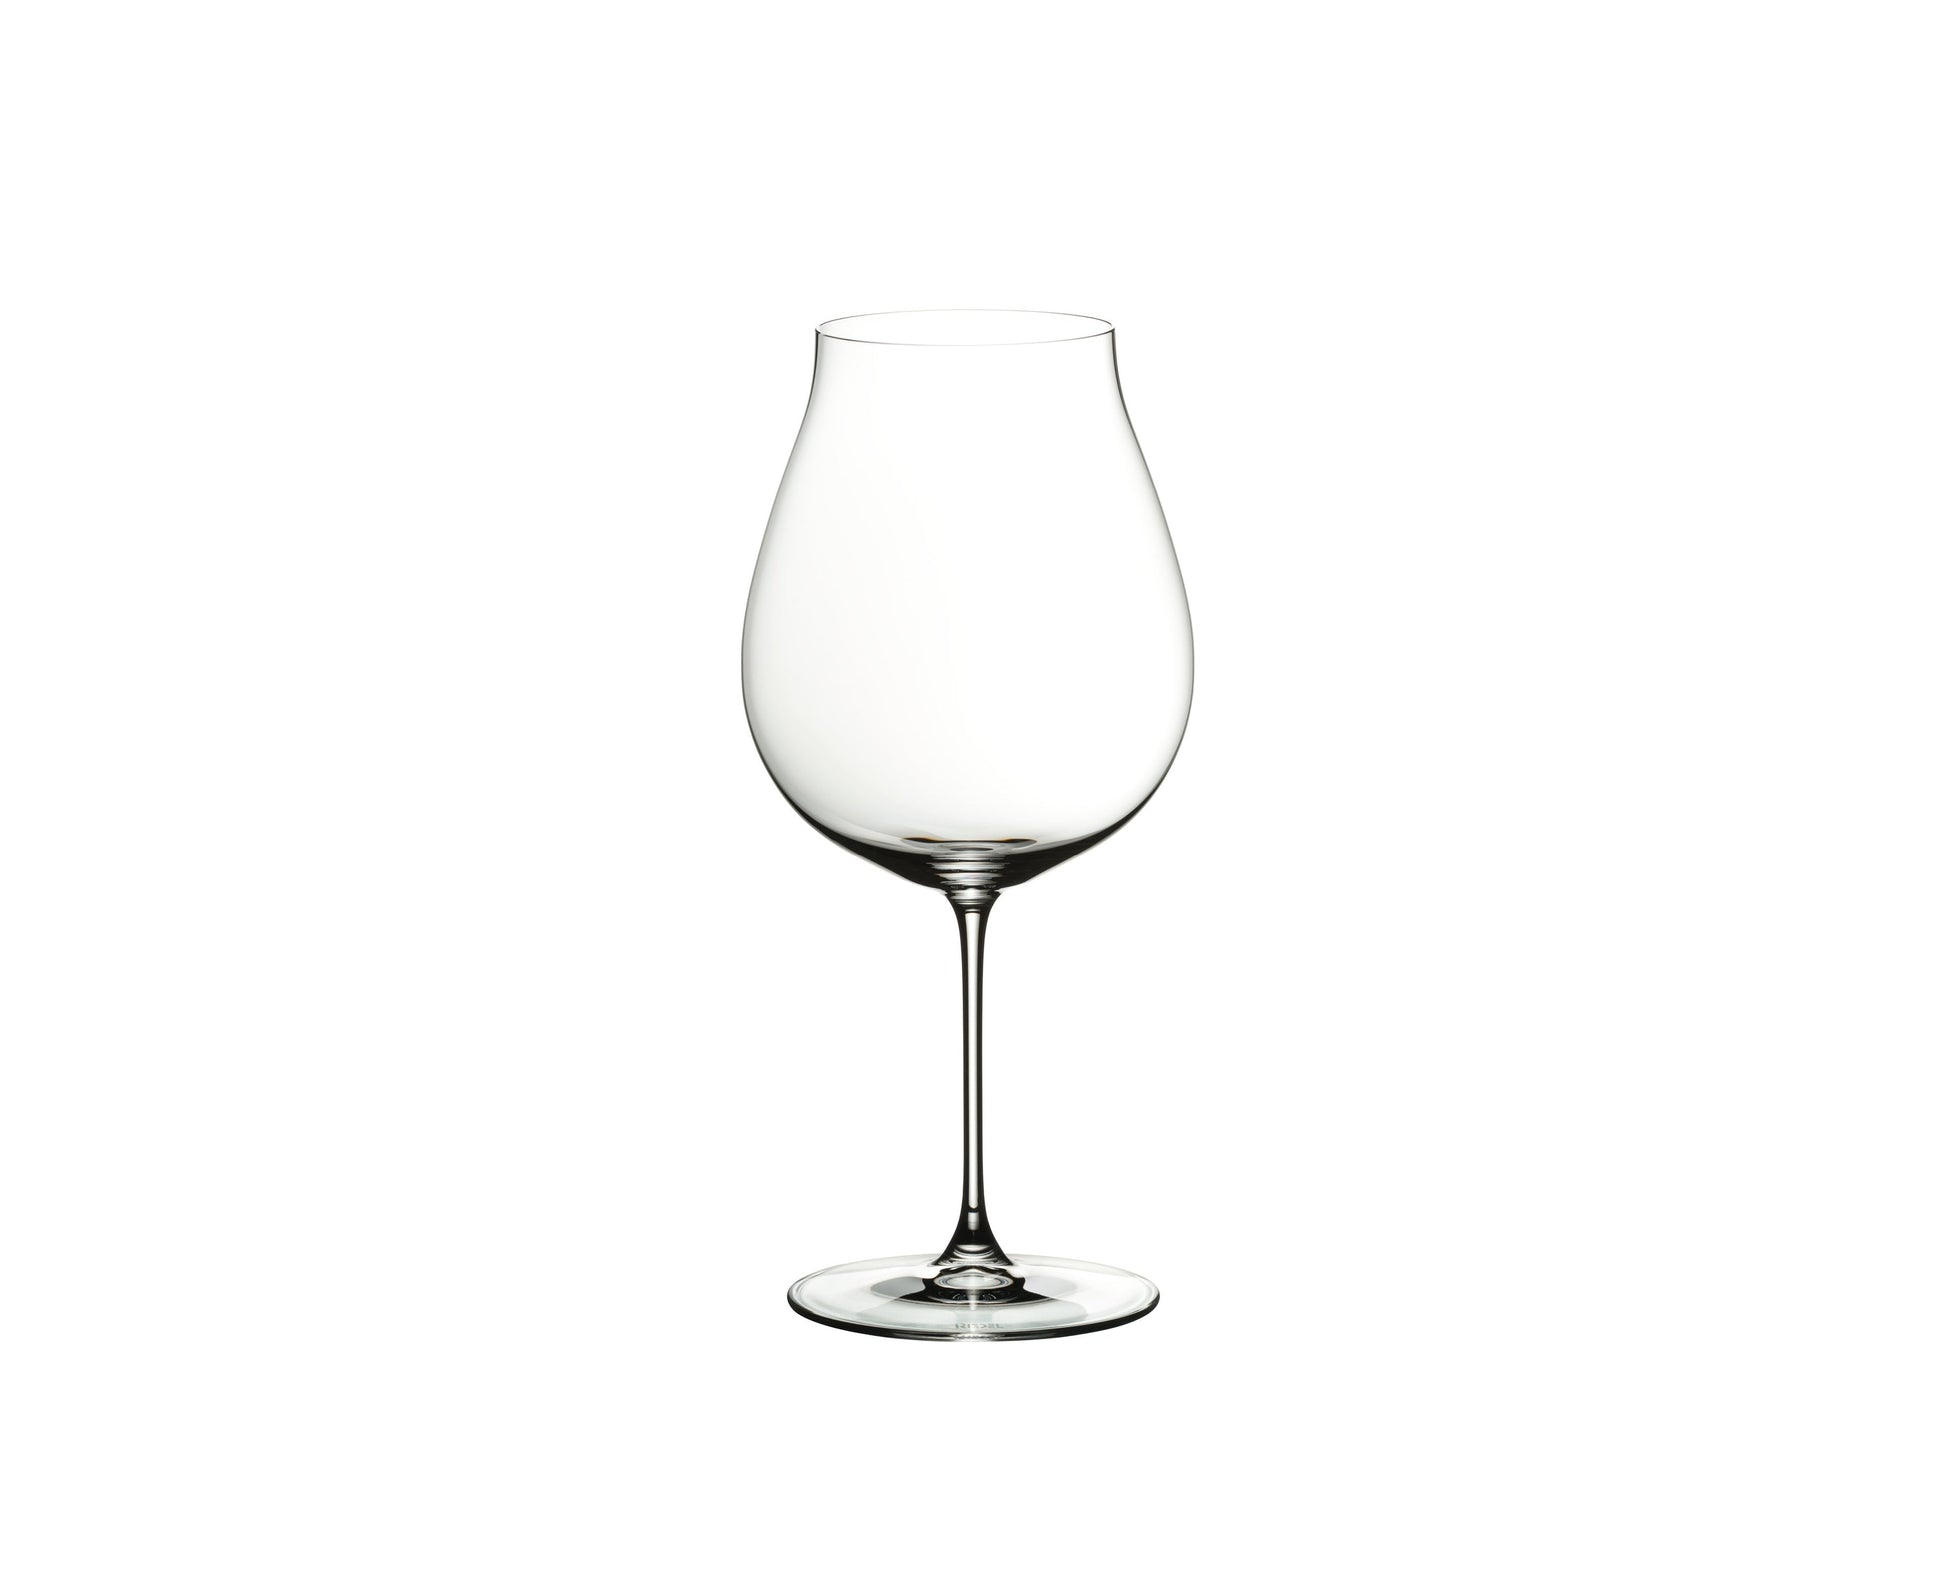 RIEDEL Veritas New World Pinot Noir Glass x 6 Glasses - Premium Accessory from RIEDEL - Shop now at Whiskery